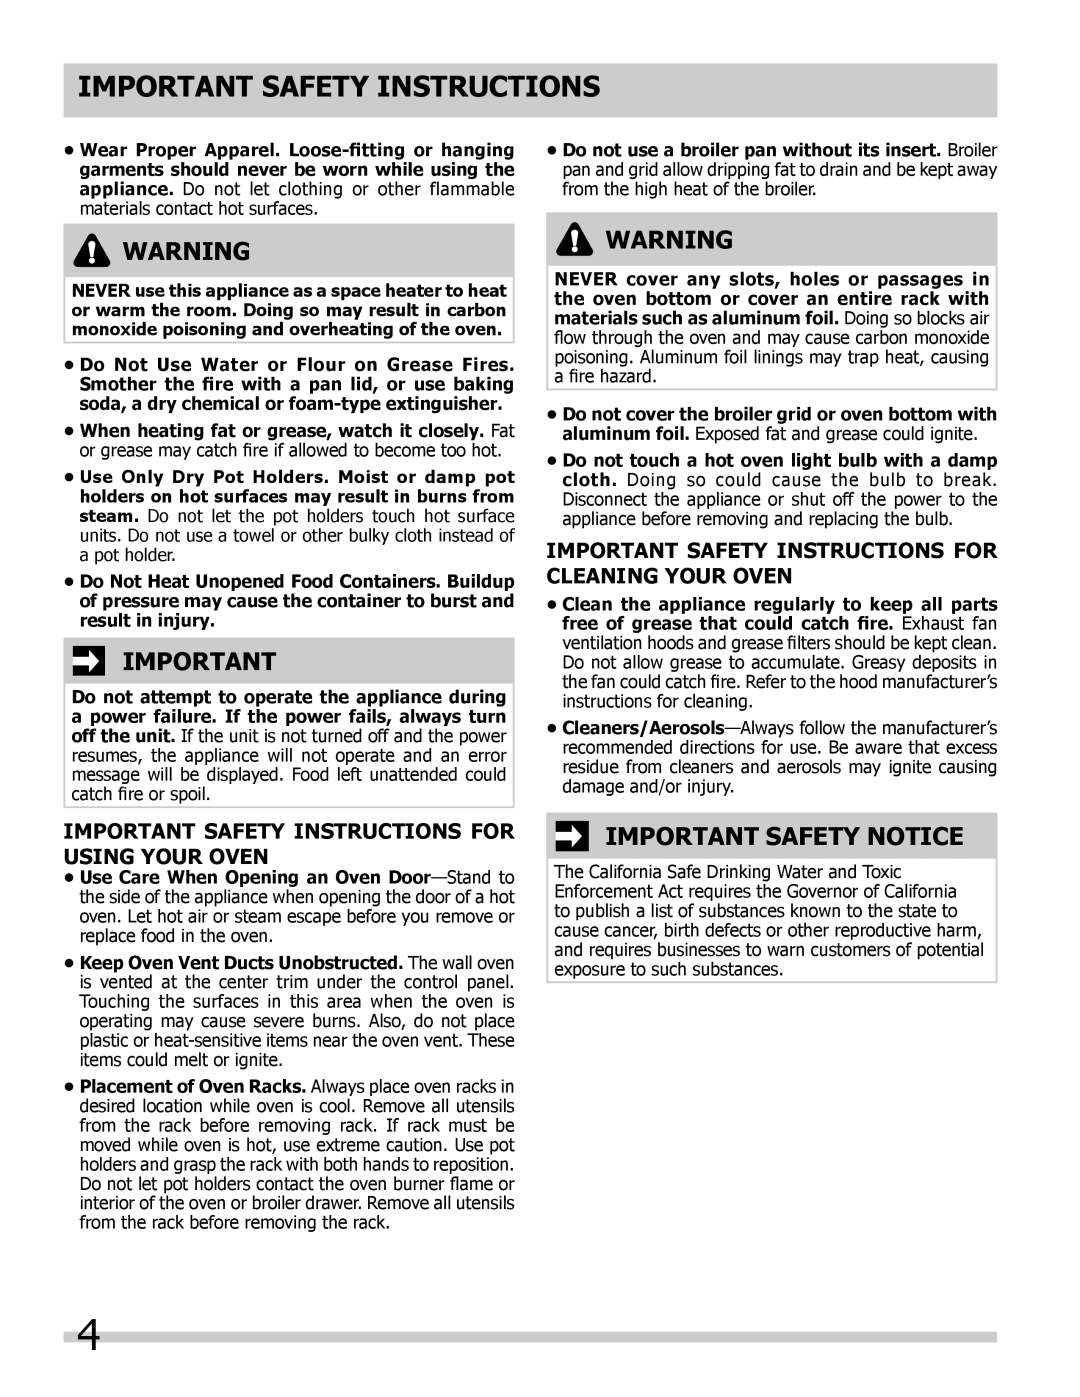 Frigidaire FGB24T3ES, FGB24T3EC, FGB24T3EB Important Safety Notice, Important Safety Instructions For Using Your Oven 